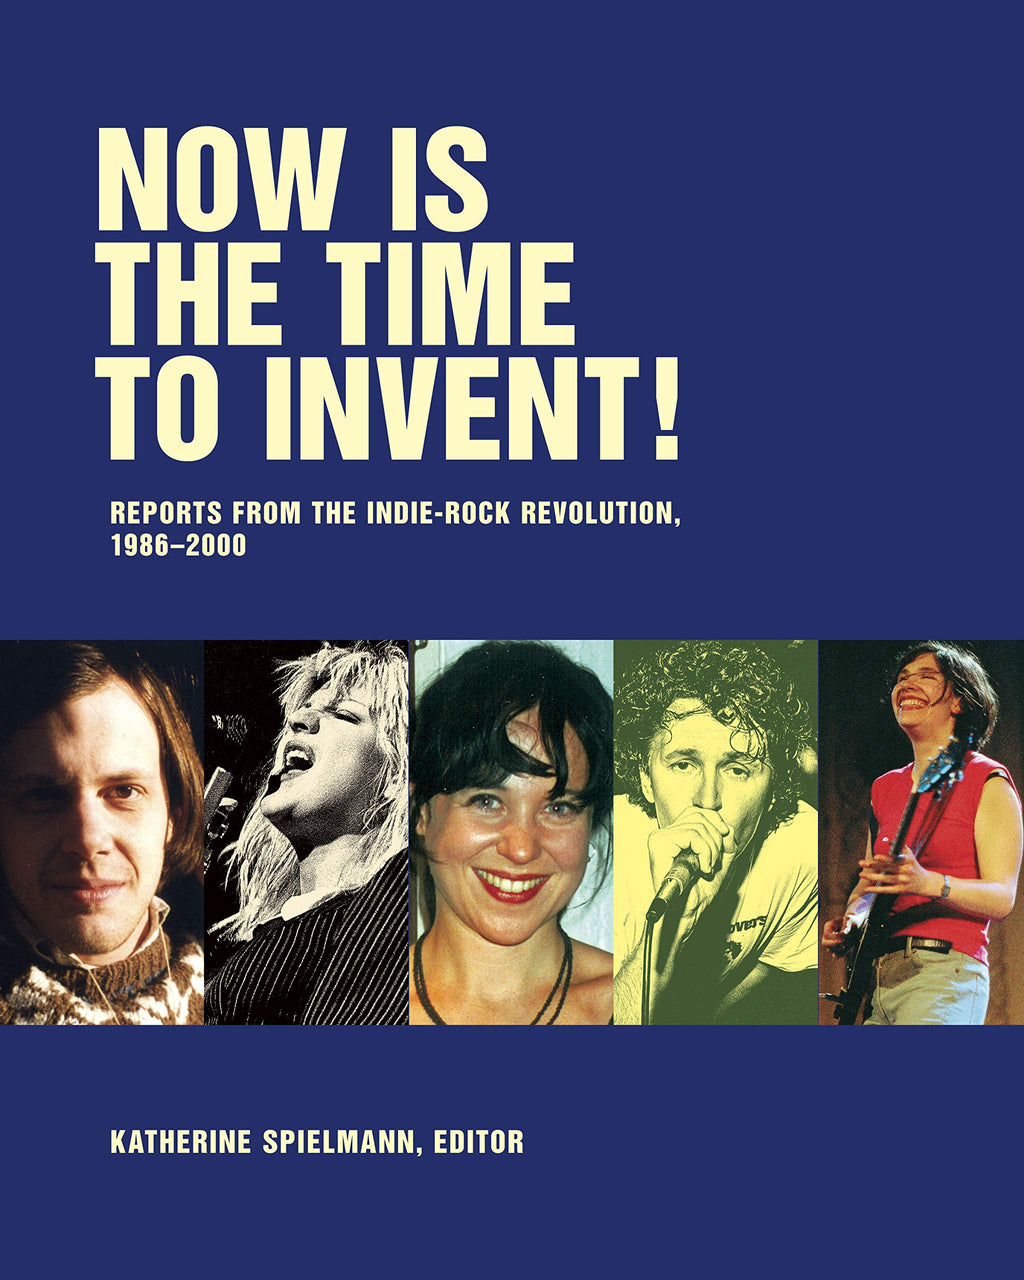 Now Is the Time to Invent! by Katherine Spielmann, Steve Connell, J Neo Marvin, and Jay Ruttenberg